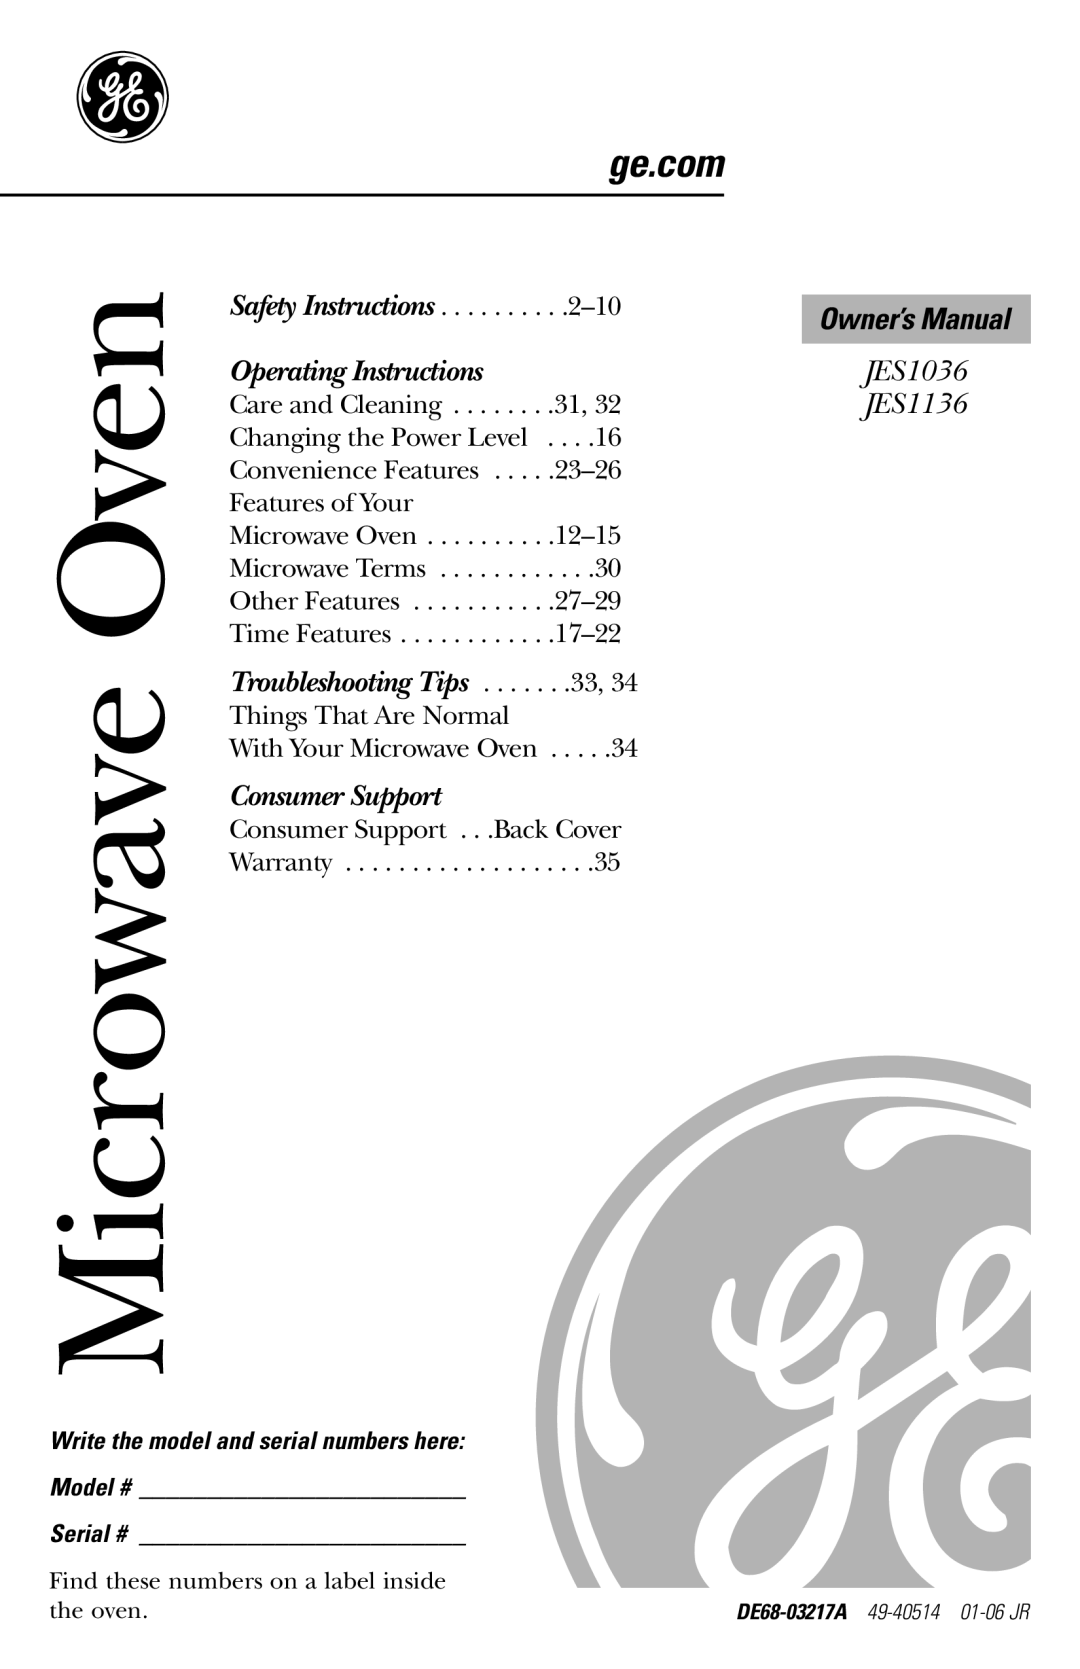 GE JES1136 owner manual ge.com, Owner’s Manual, Model # Serial #, Microwave Oven, Operating Instructions, Consumer Support 